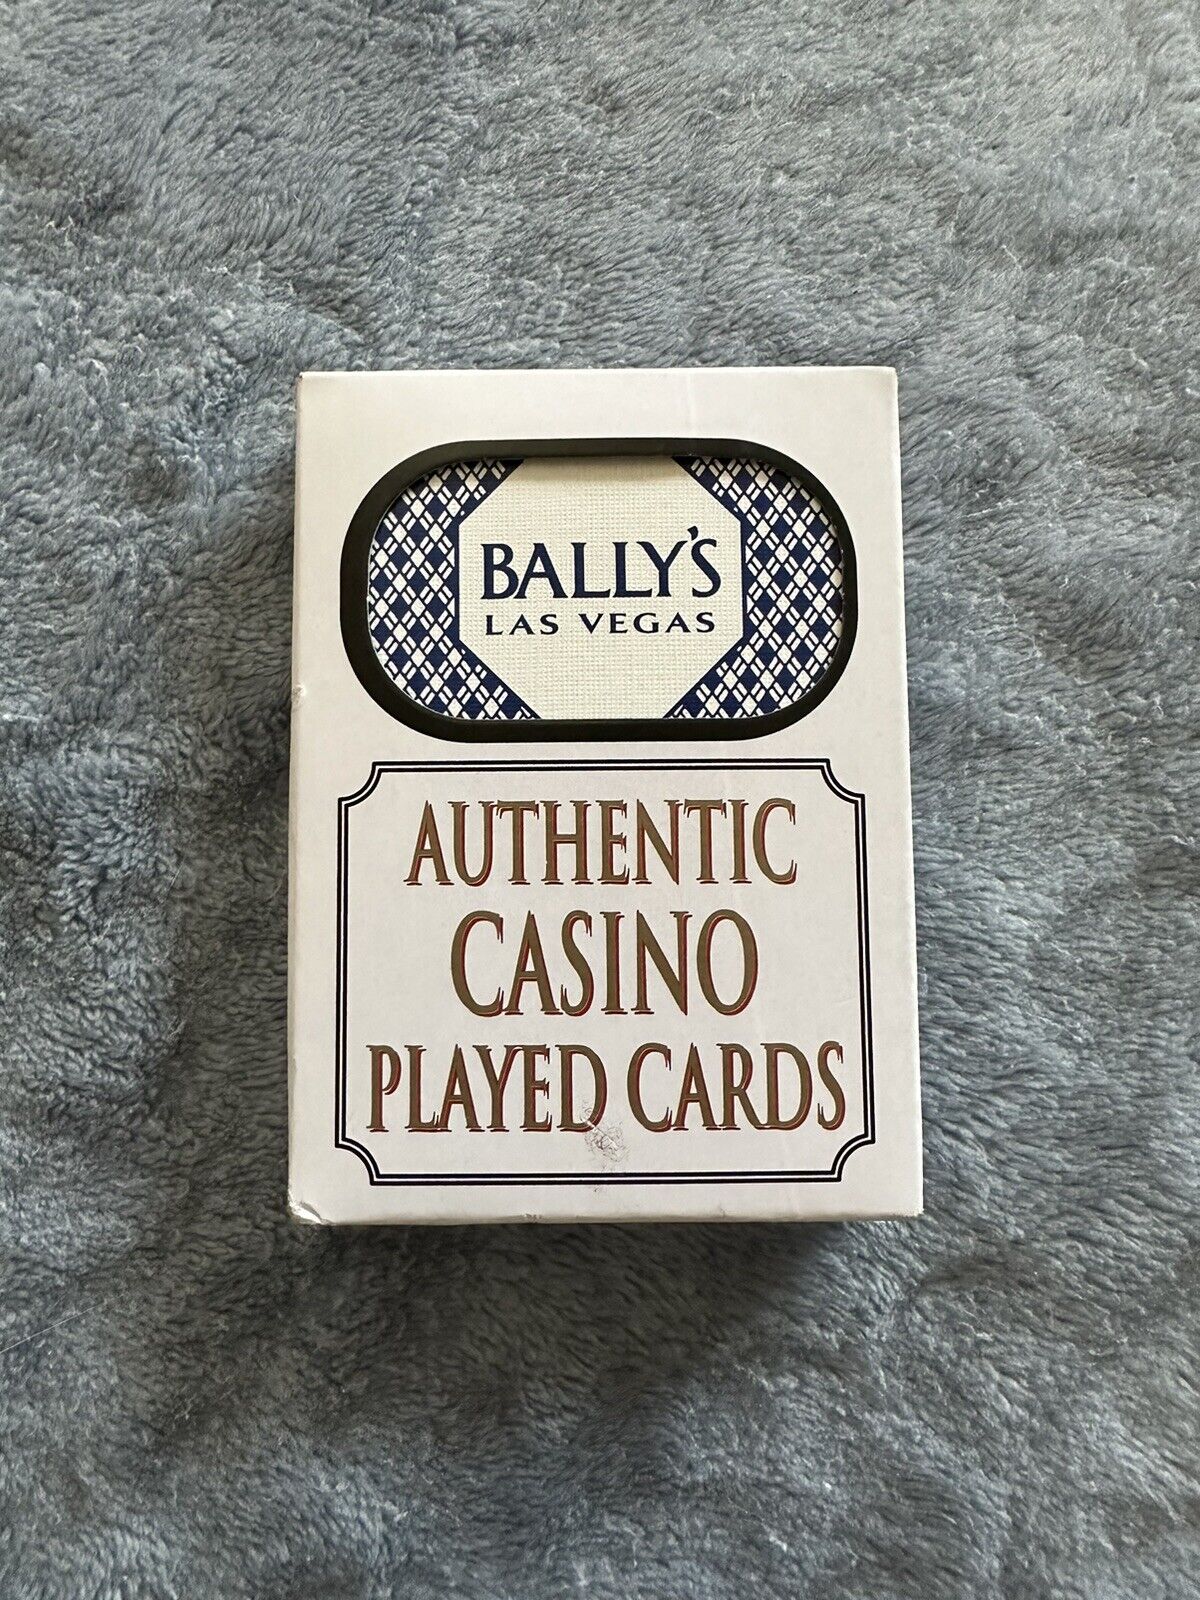 Bally’s casino playing cards